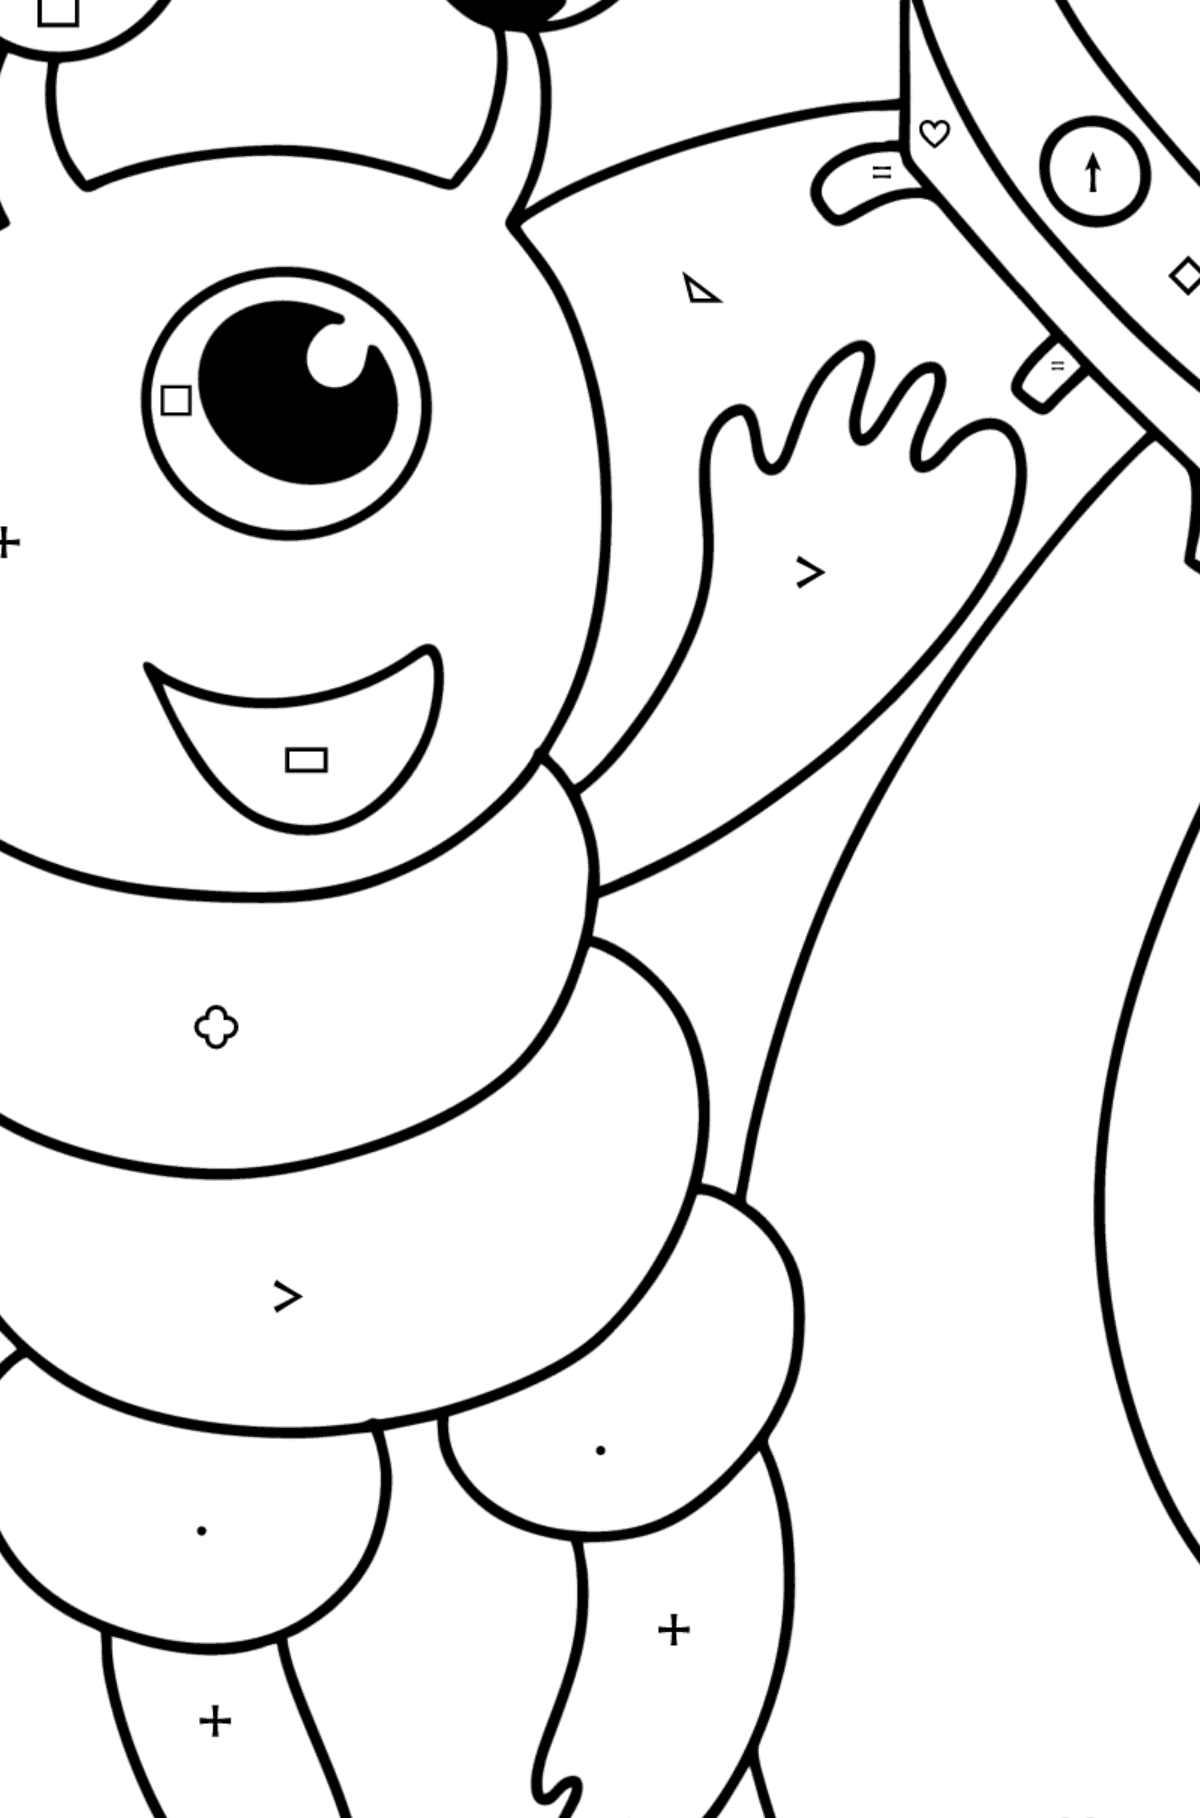 Alien in space coloring page - Coloring by Symbols and Geometric Shapes for Kids